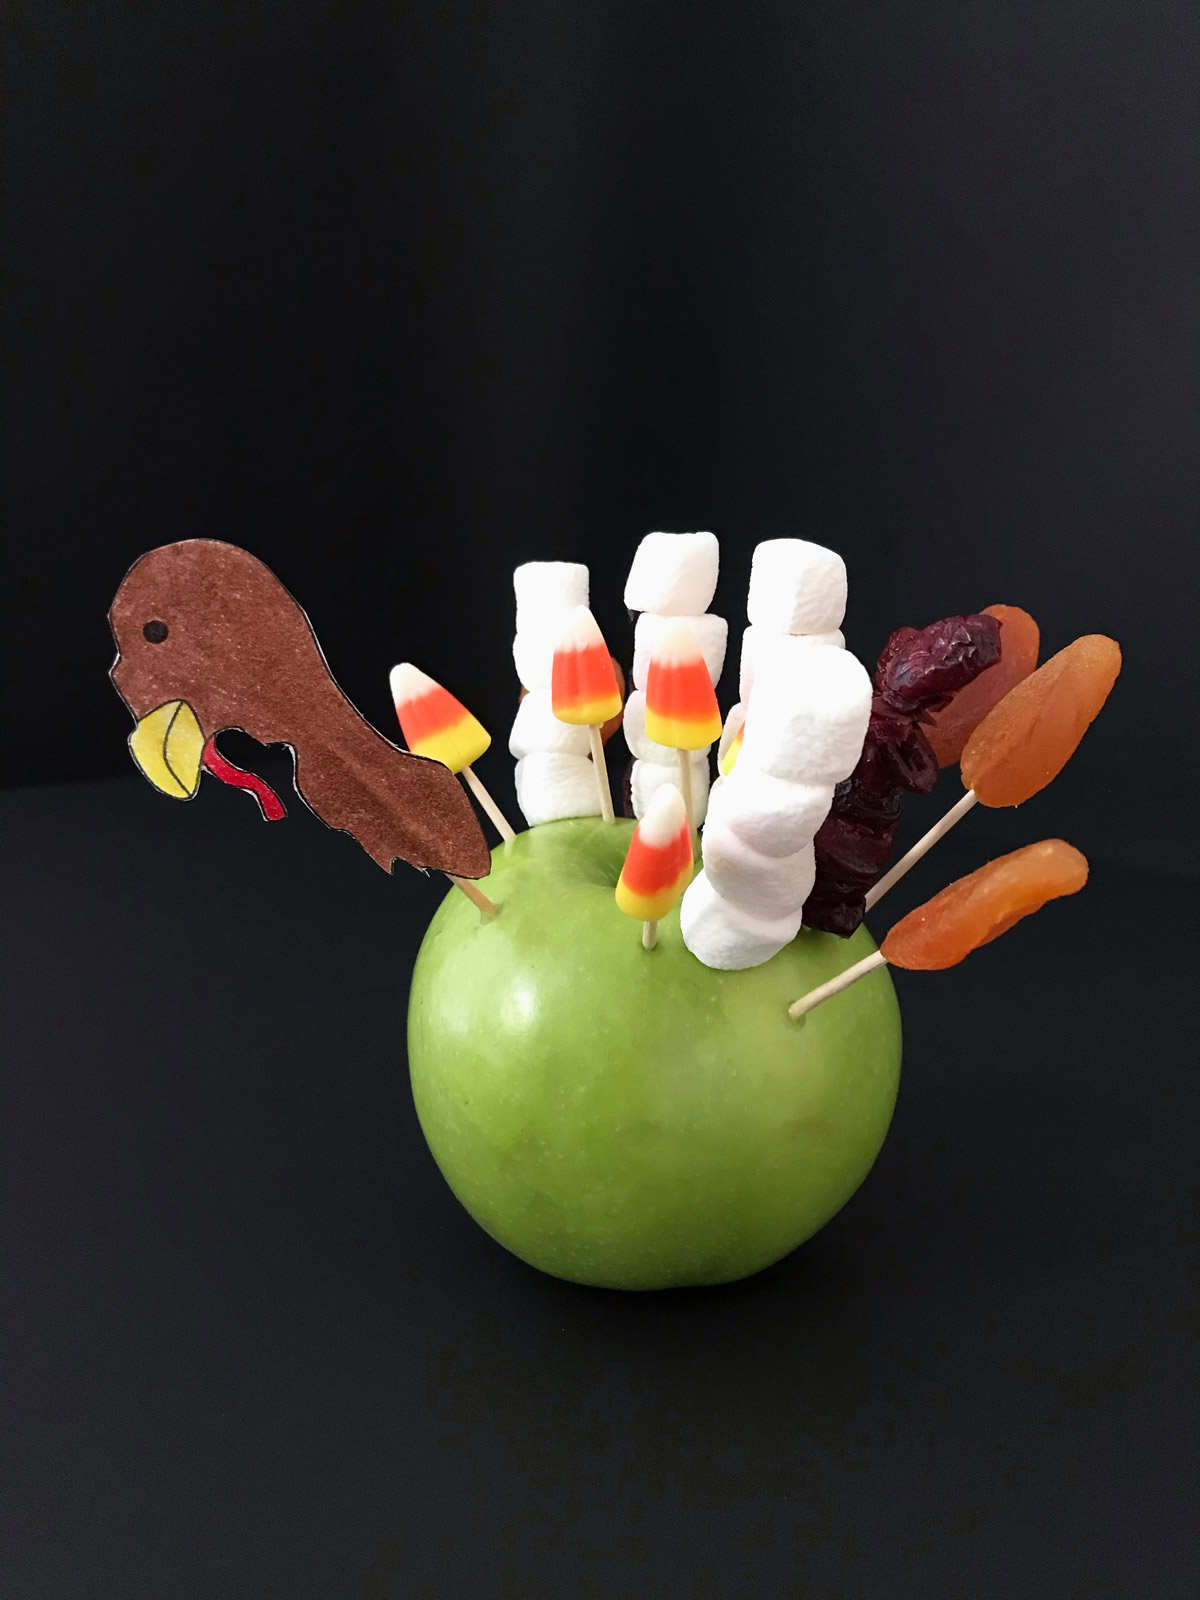 green apple decorated as a turkey with toothpicks, marshmallows, candy corn, and dried fruit.